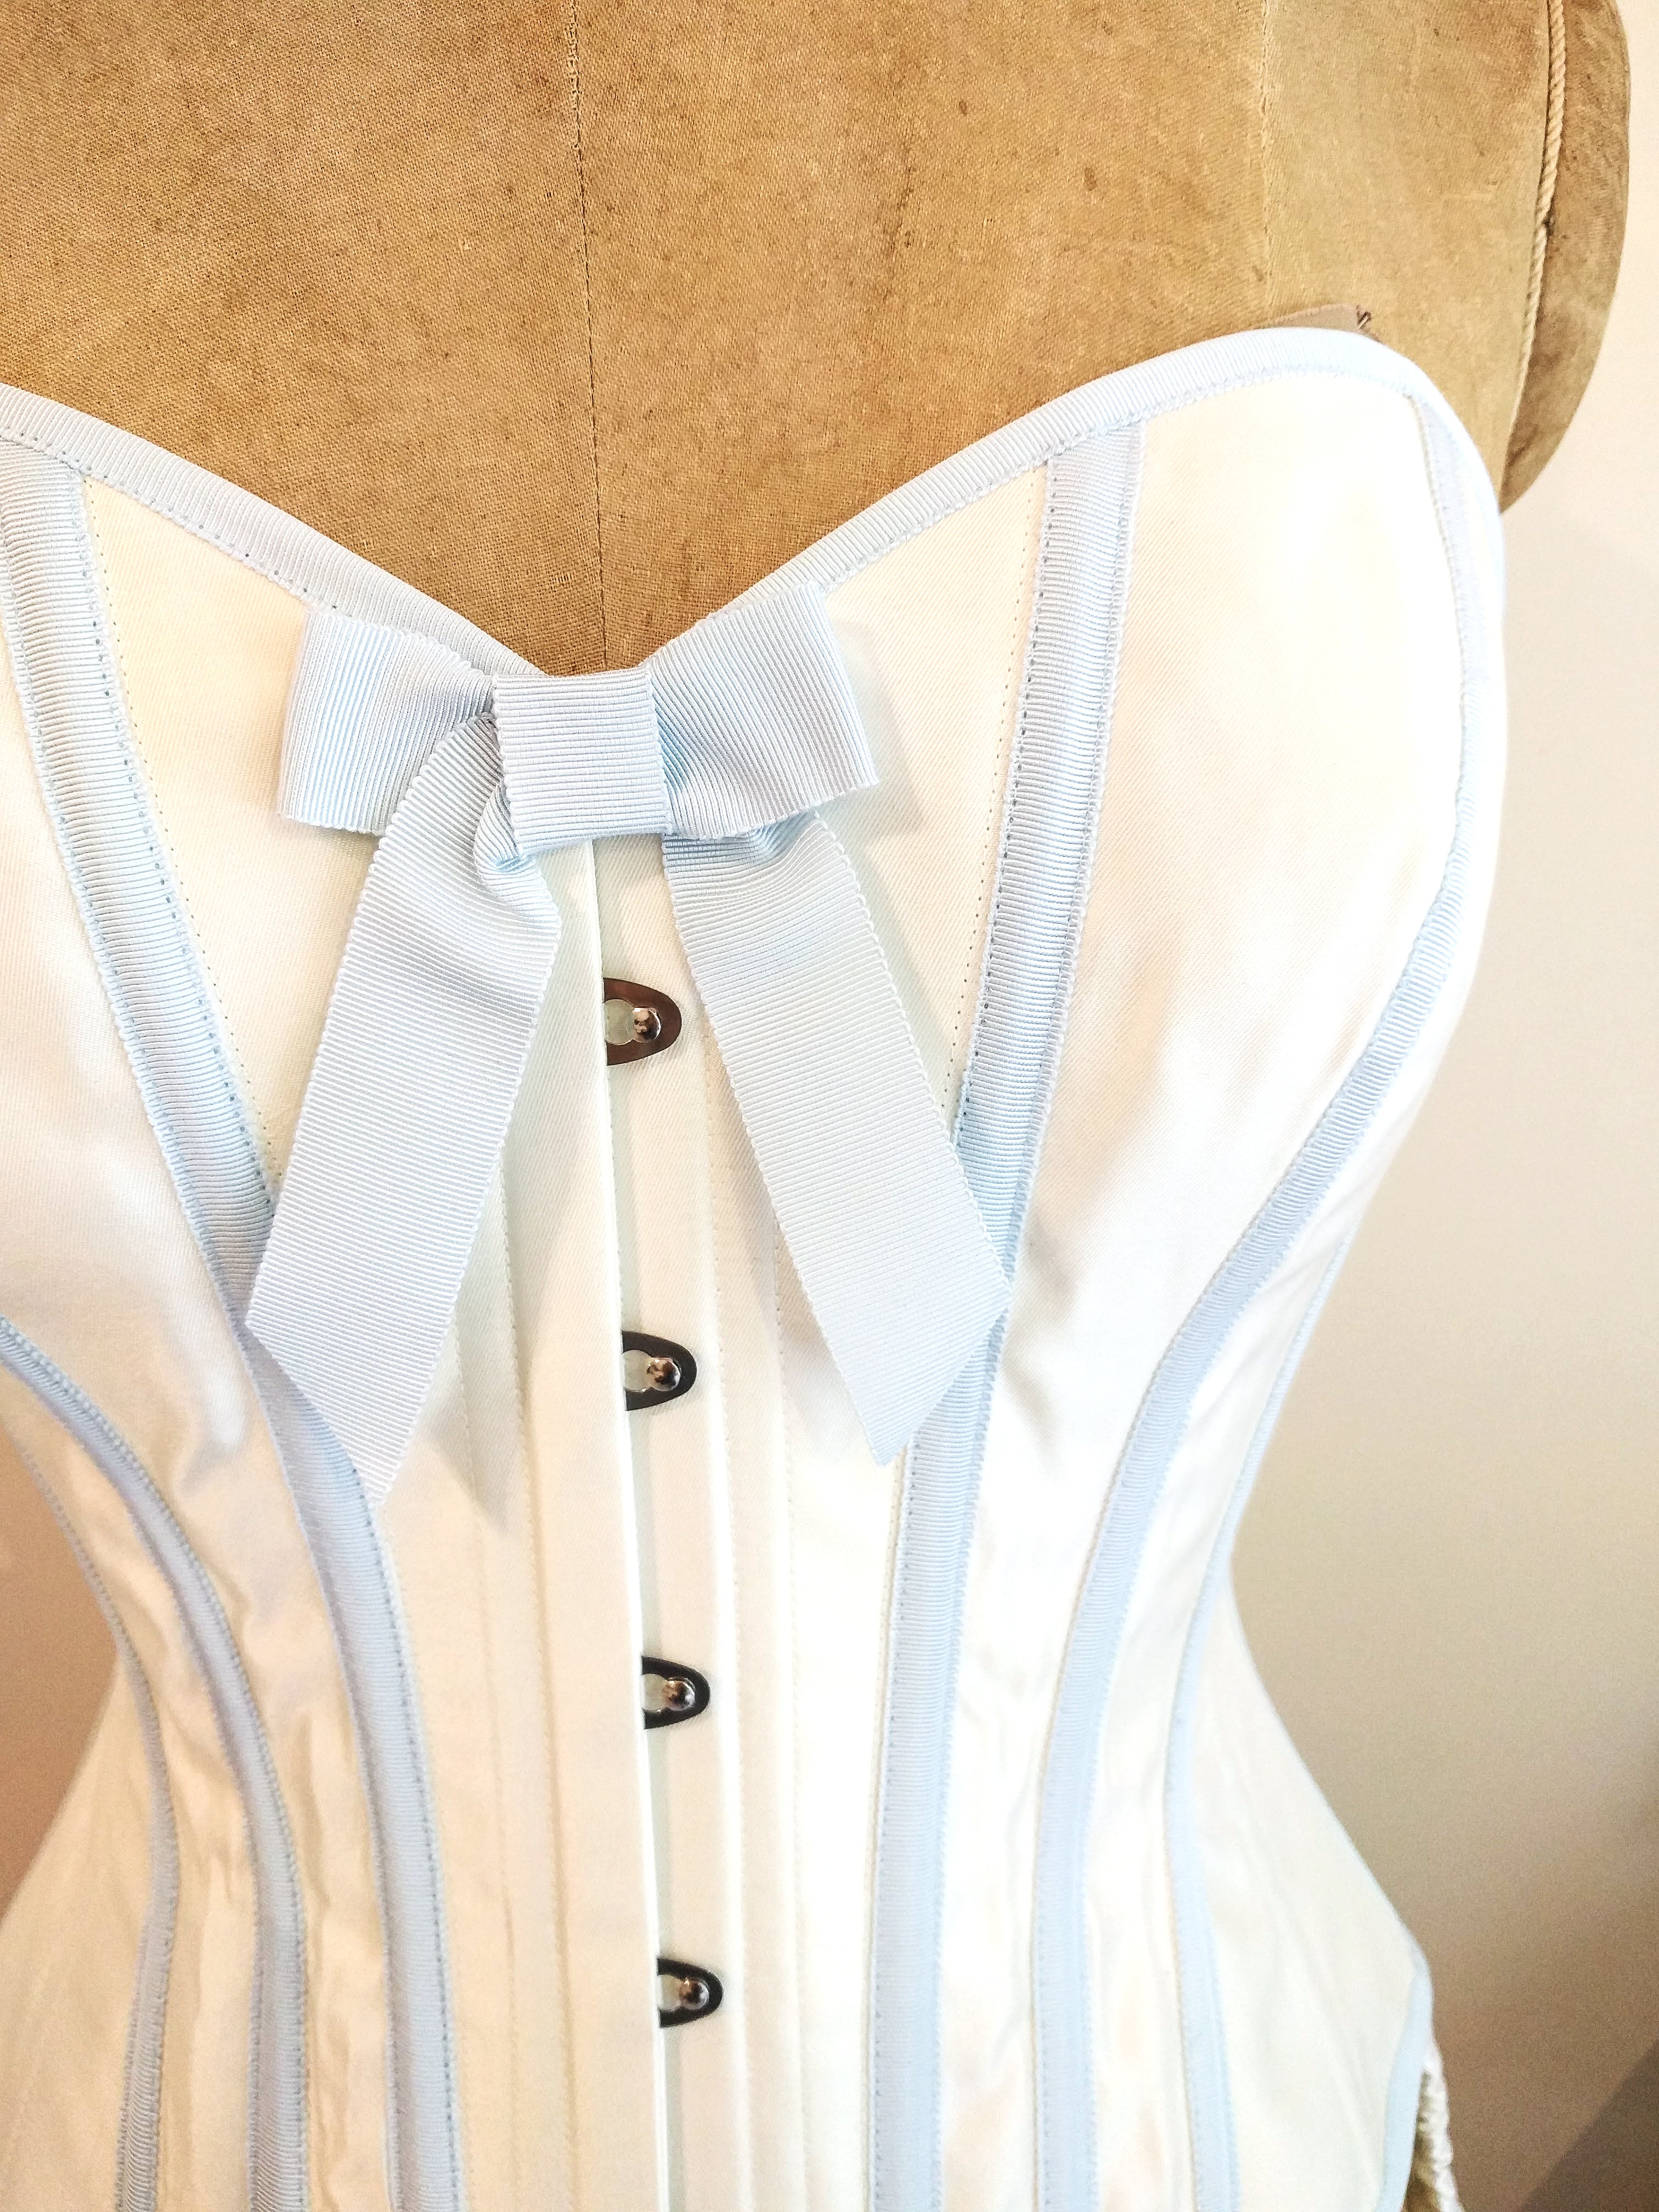 Ivory wedding trousseau corset with real steel boning and coutil structure